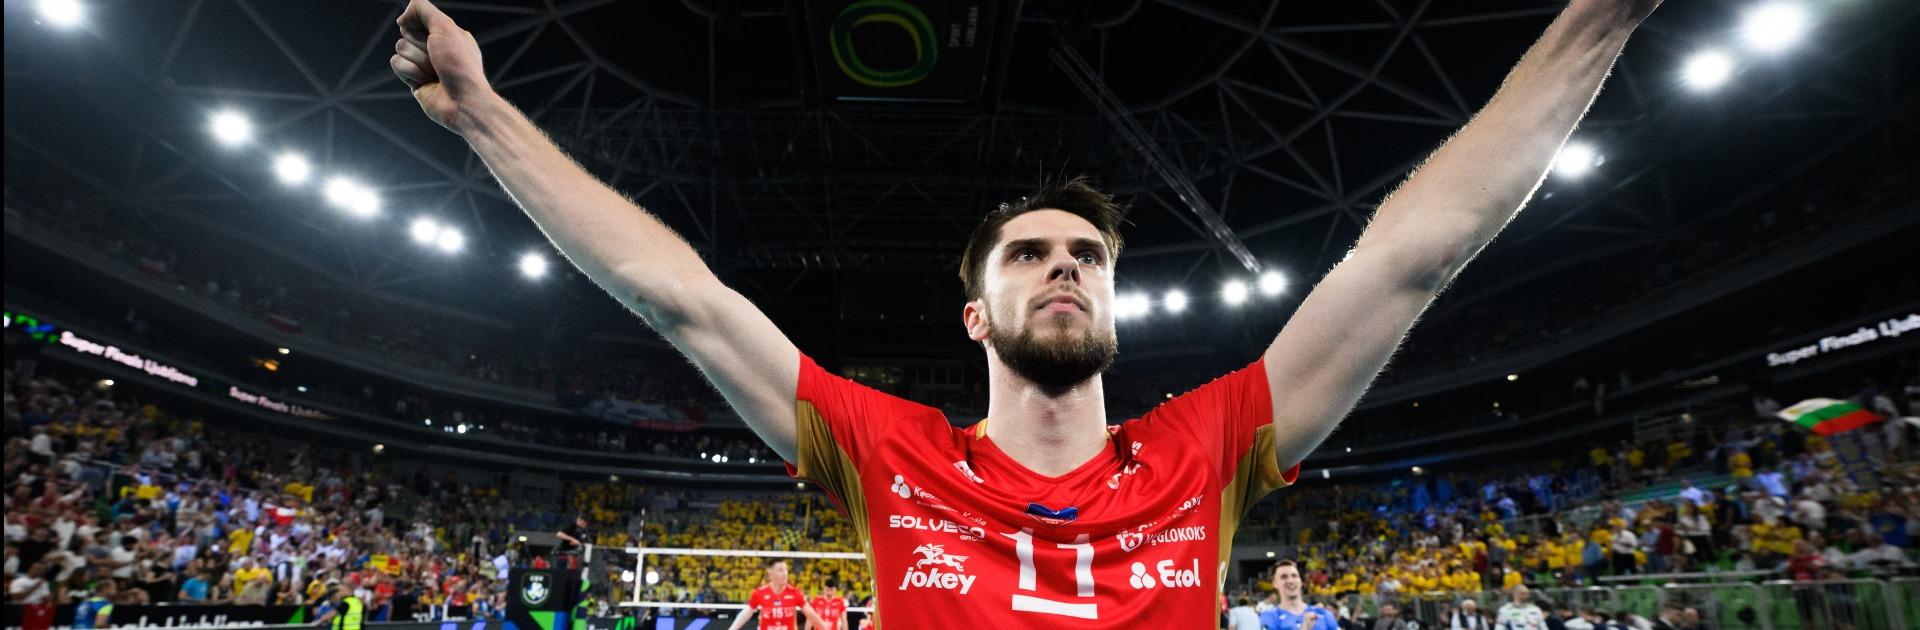 volleyball nations league 2022 streaming